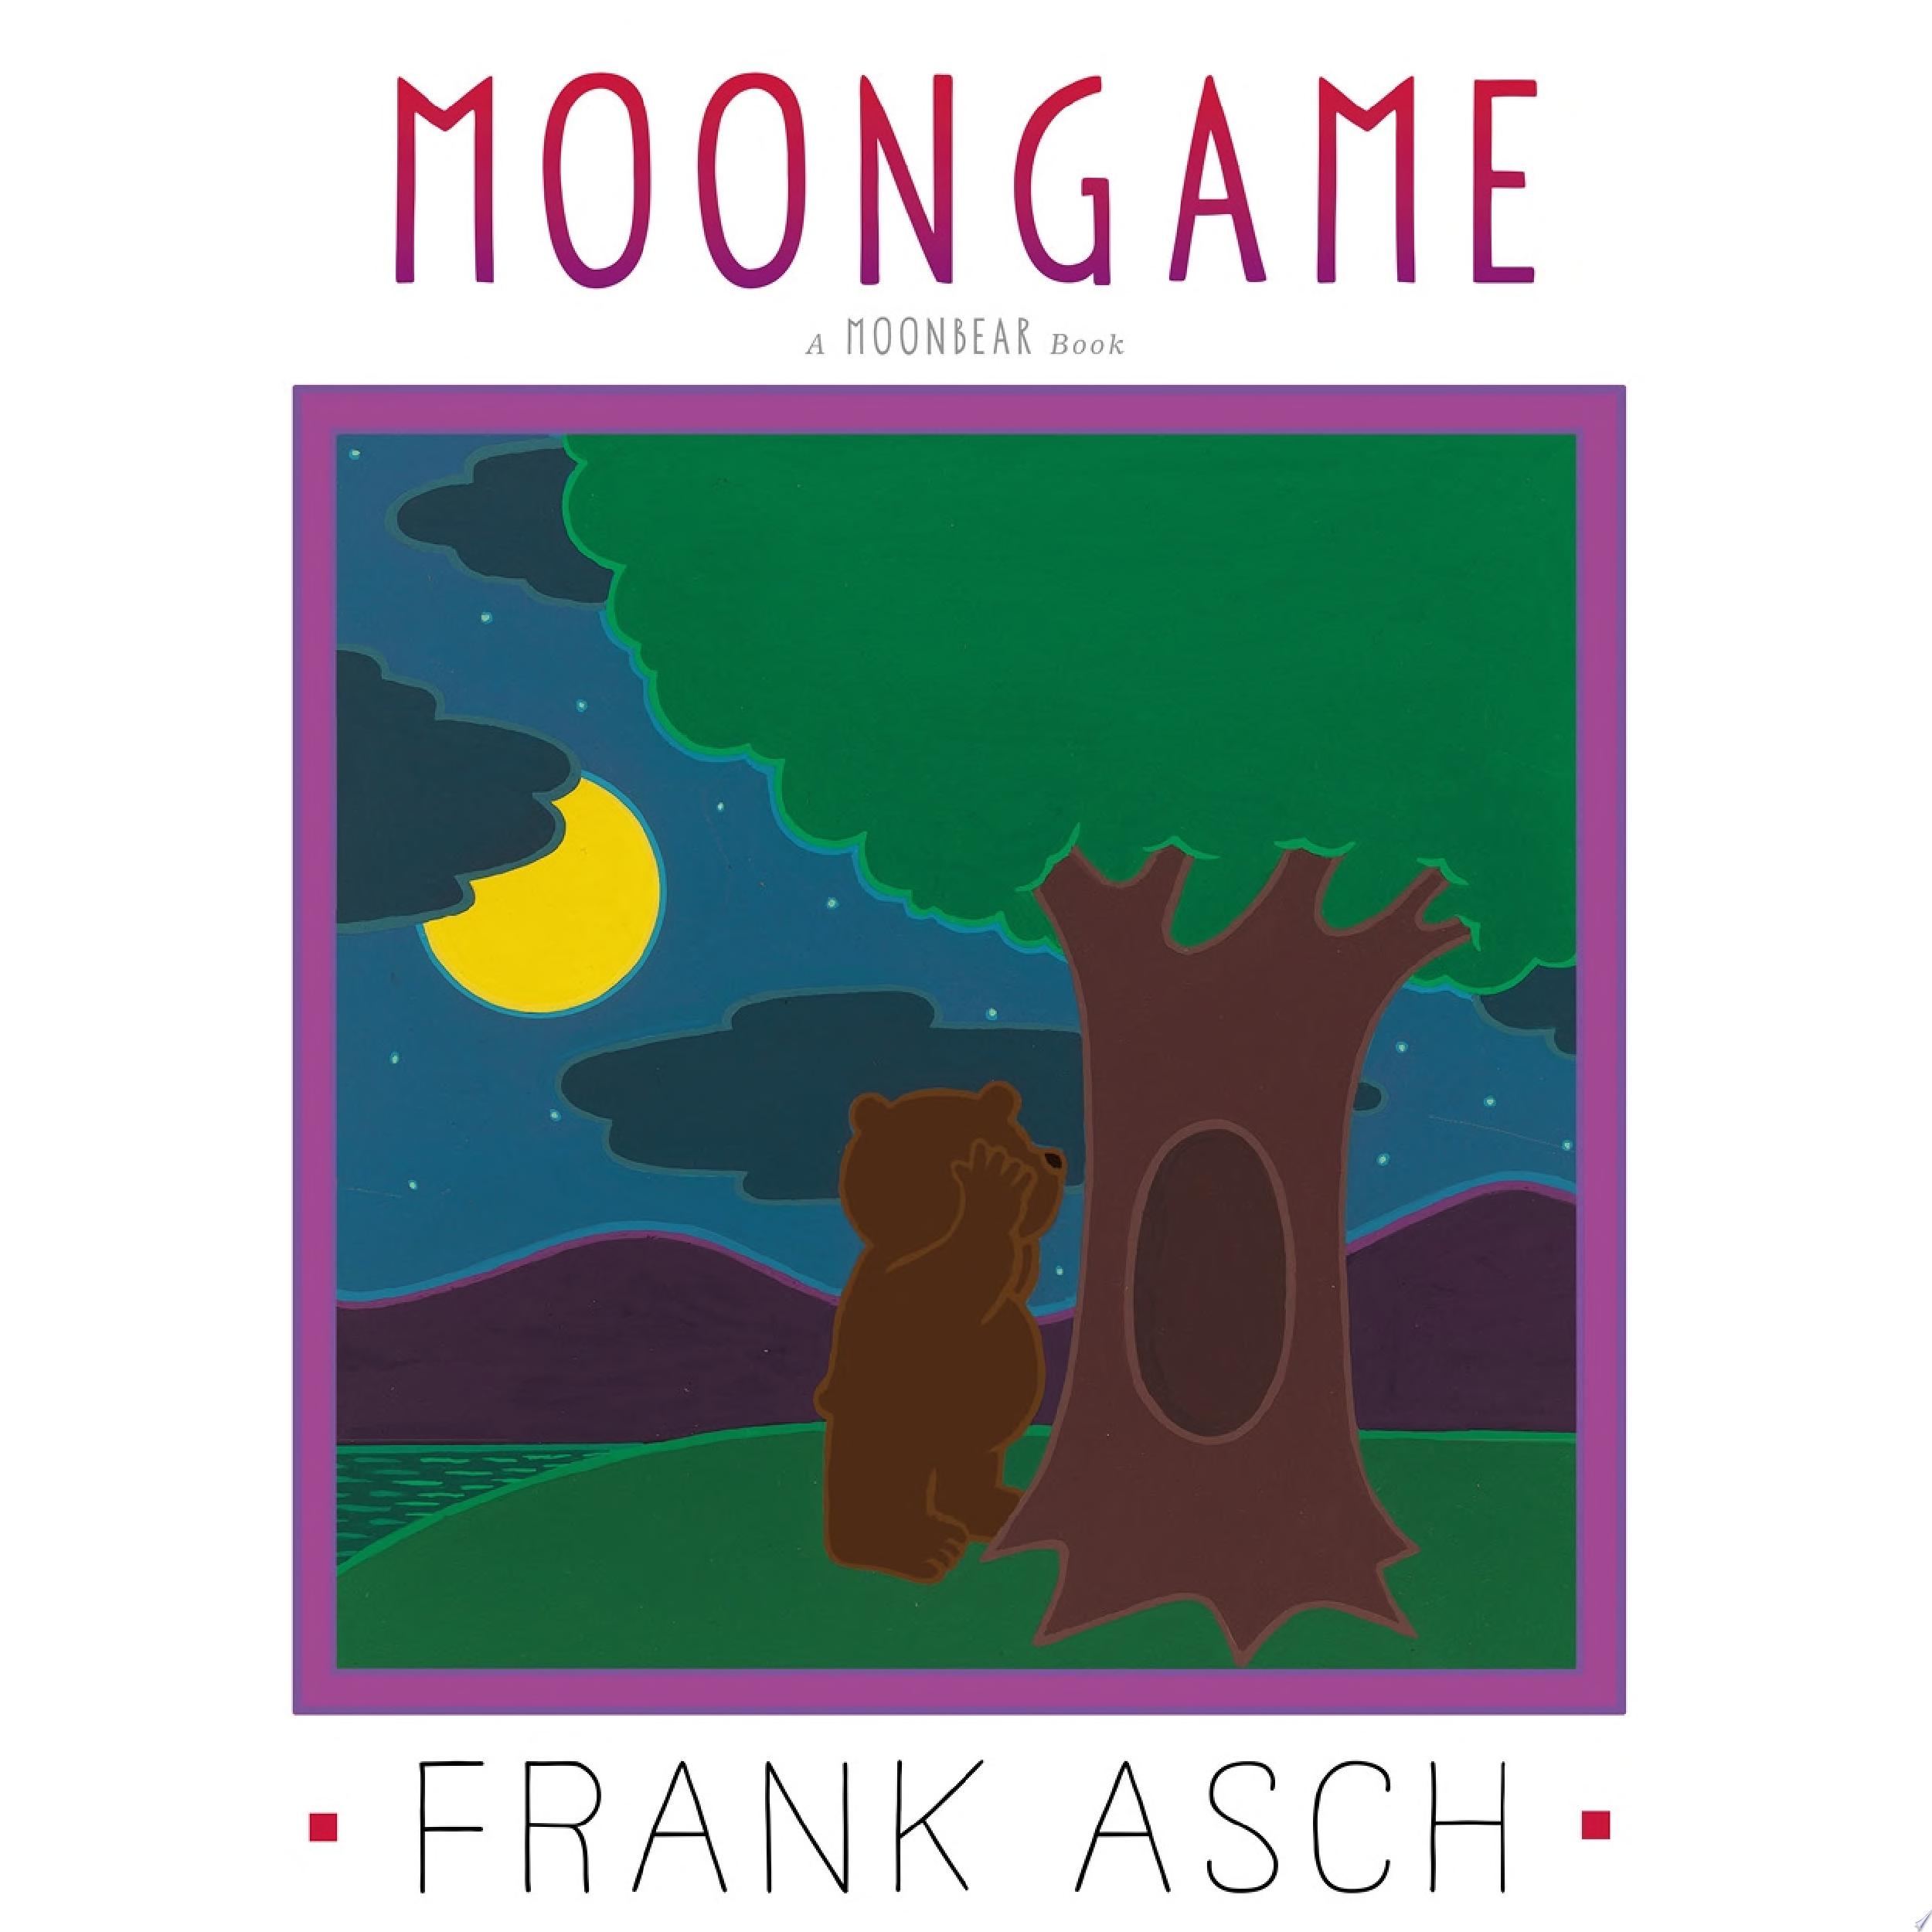 Image for "Moongame"